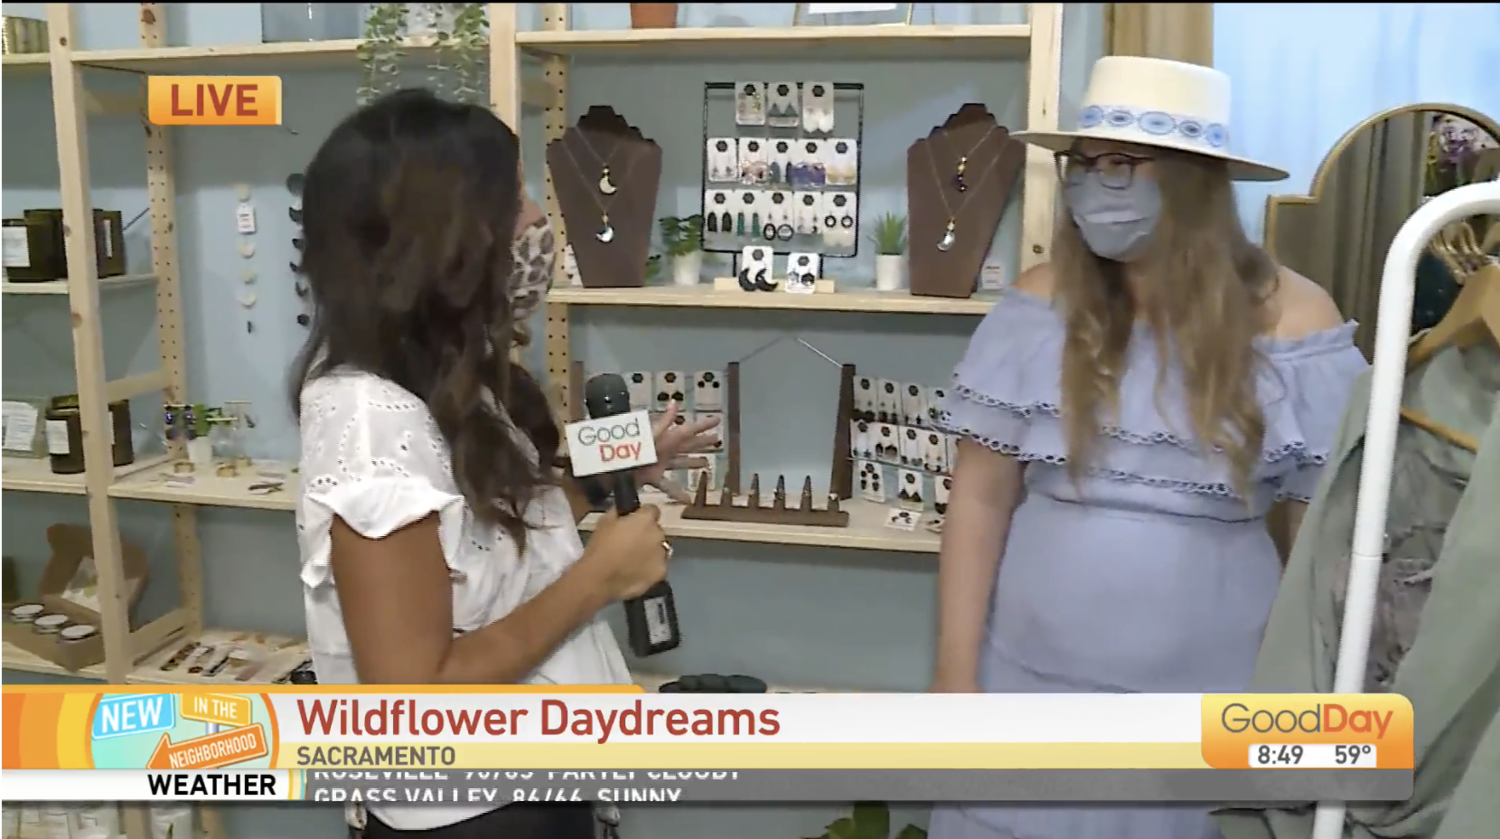 wildflower daydreams constellation marketplace good day sacramento feature.png